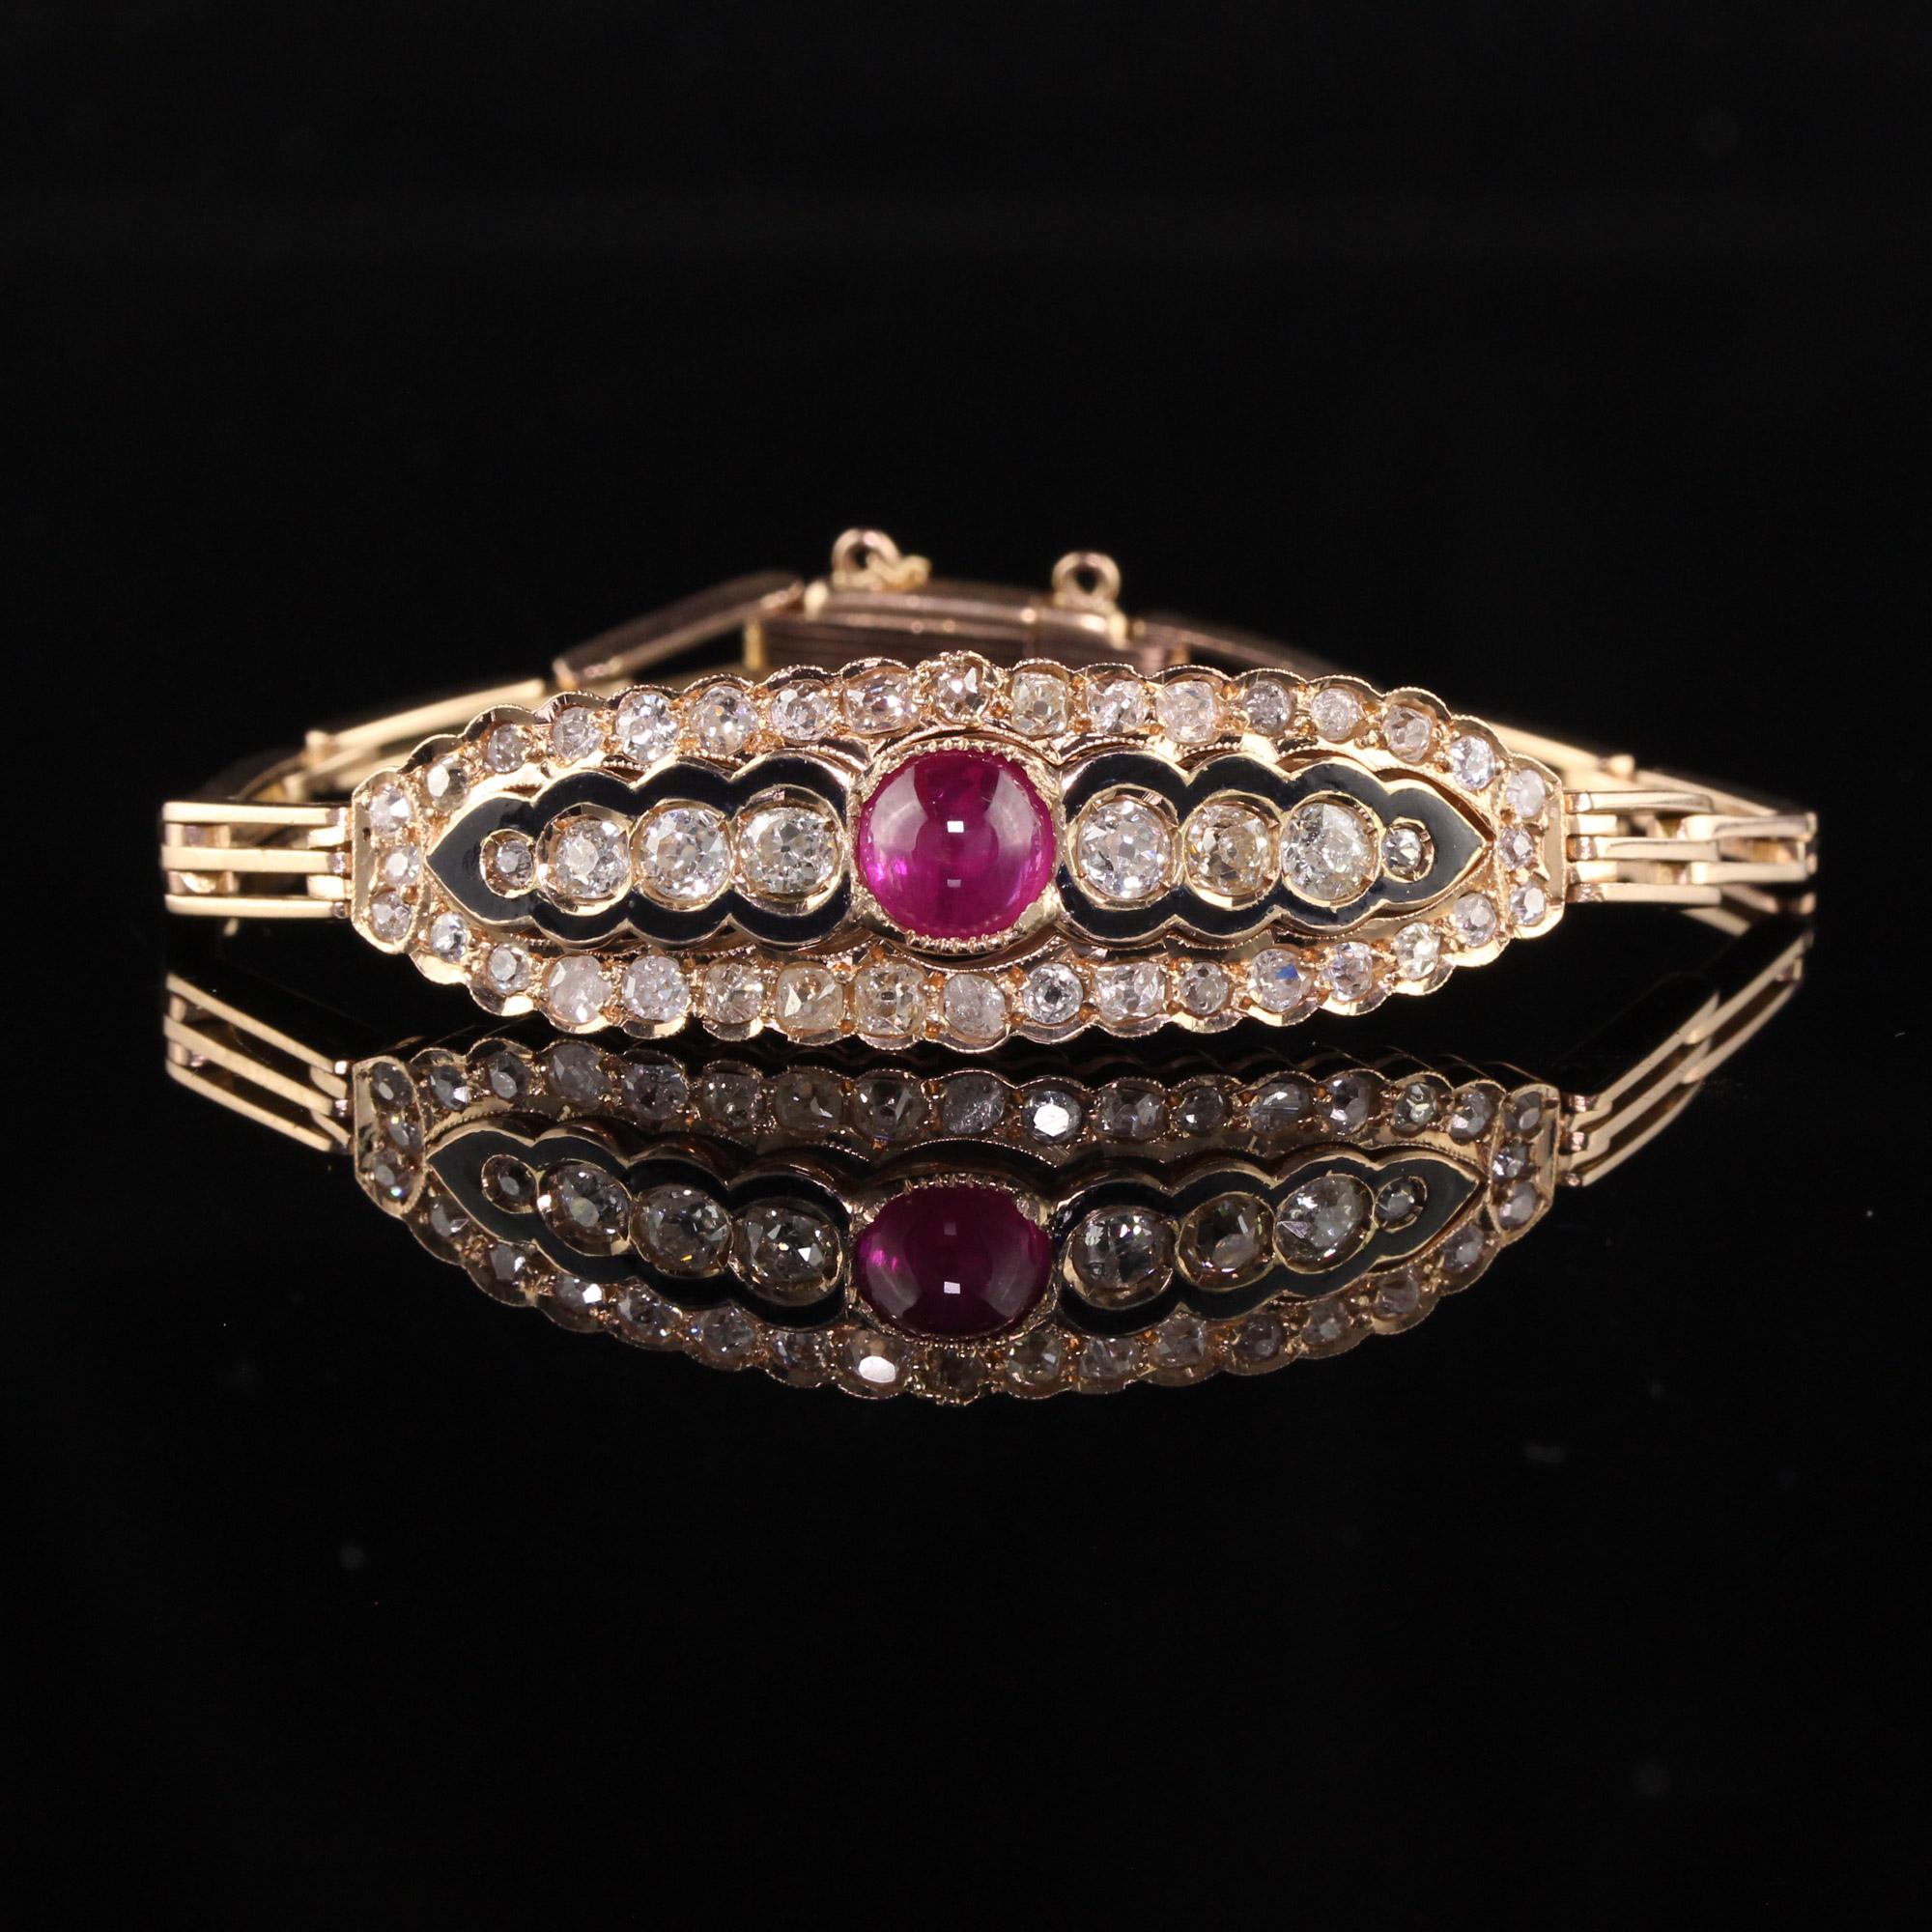 Women's Antique Victorian 14K Rose Gold Old Mine Diamond and Cabochon Ruby Bracelet For Sale